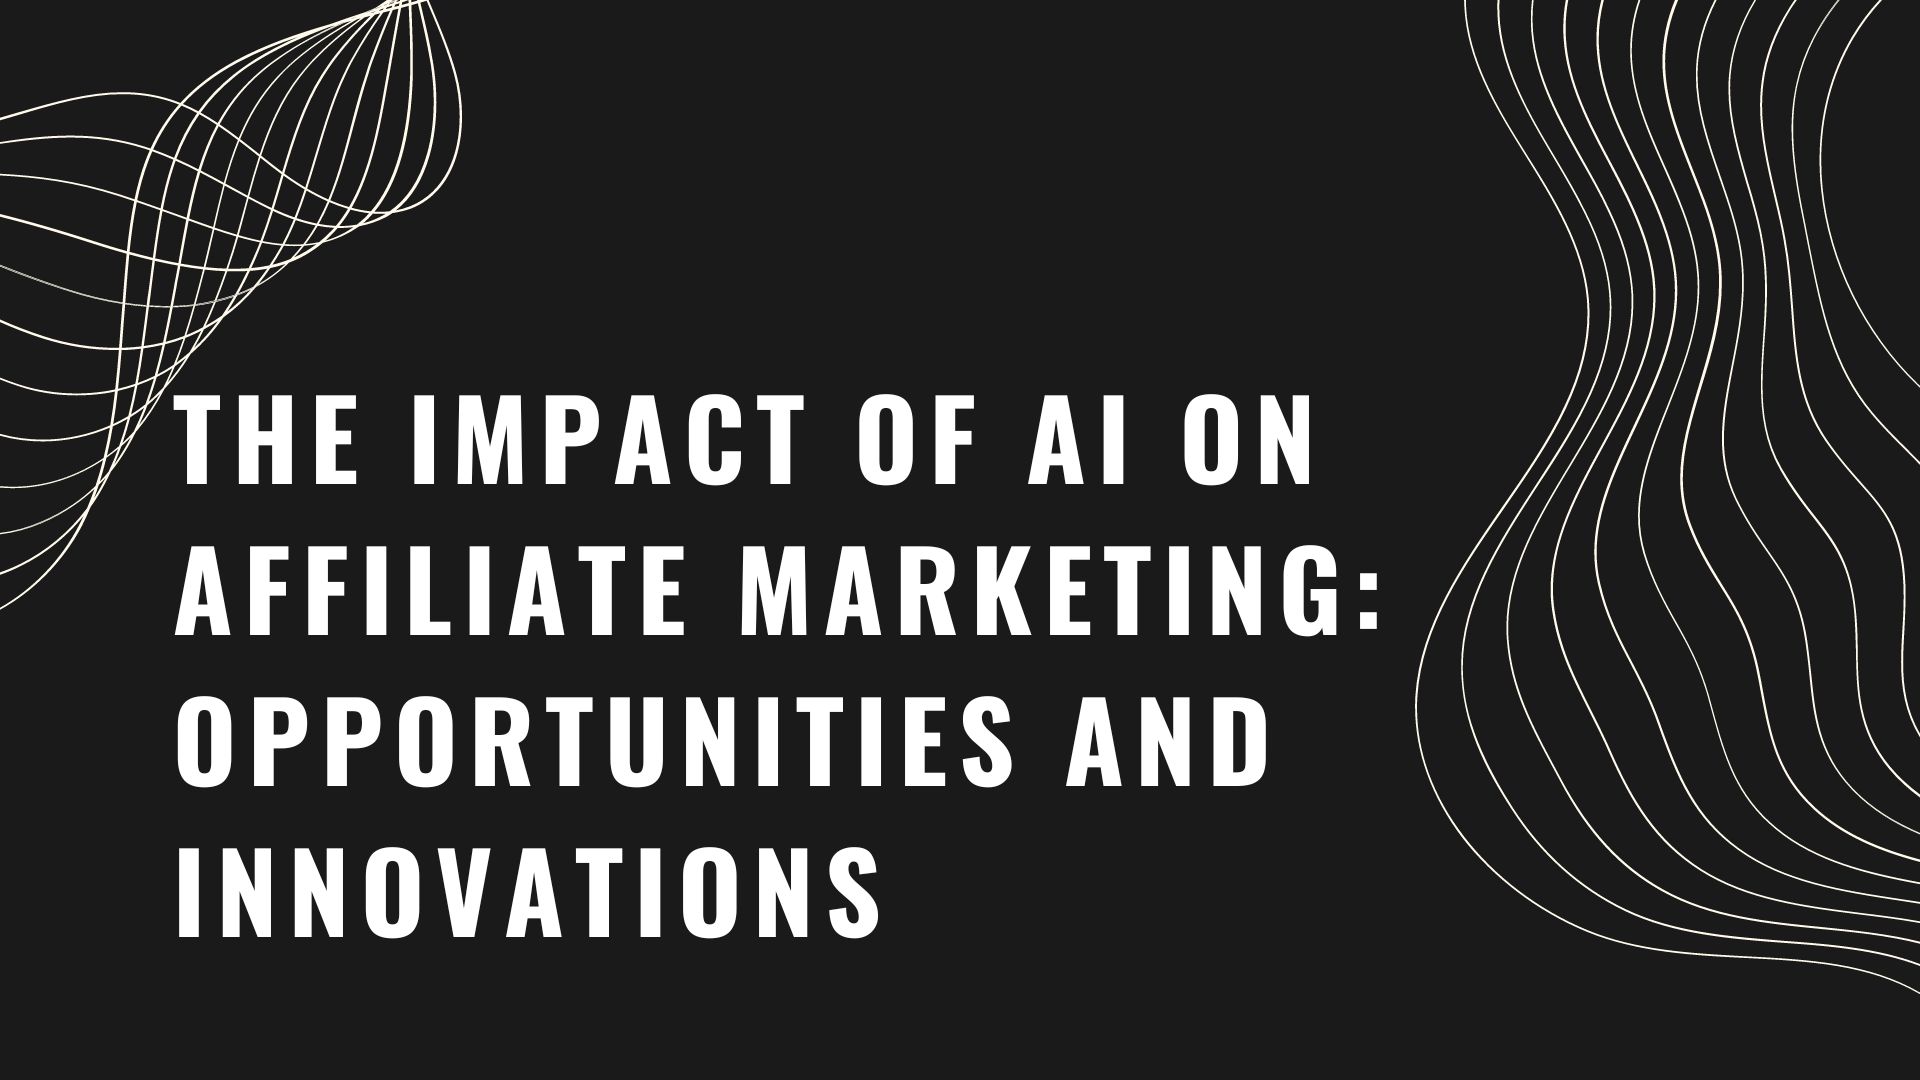 The Impact of AI on Affiliate Marketing Opportunities and Innovations